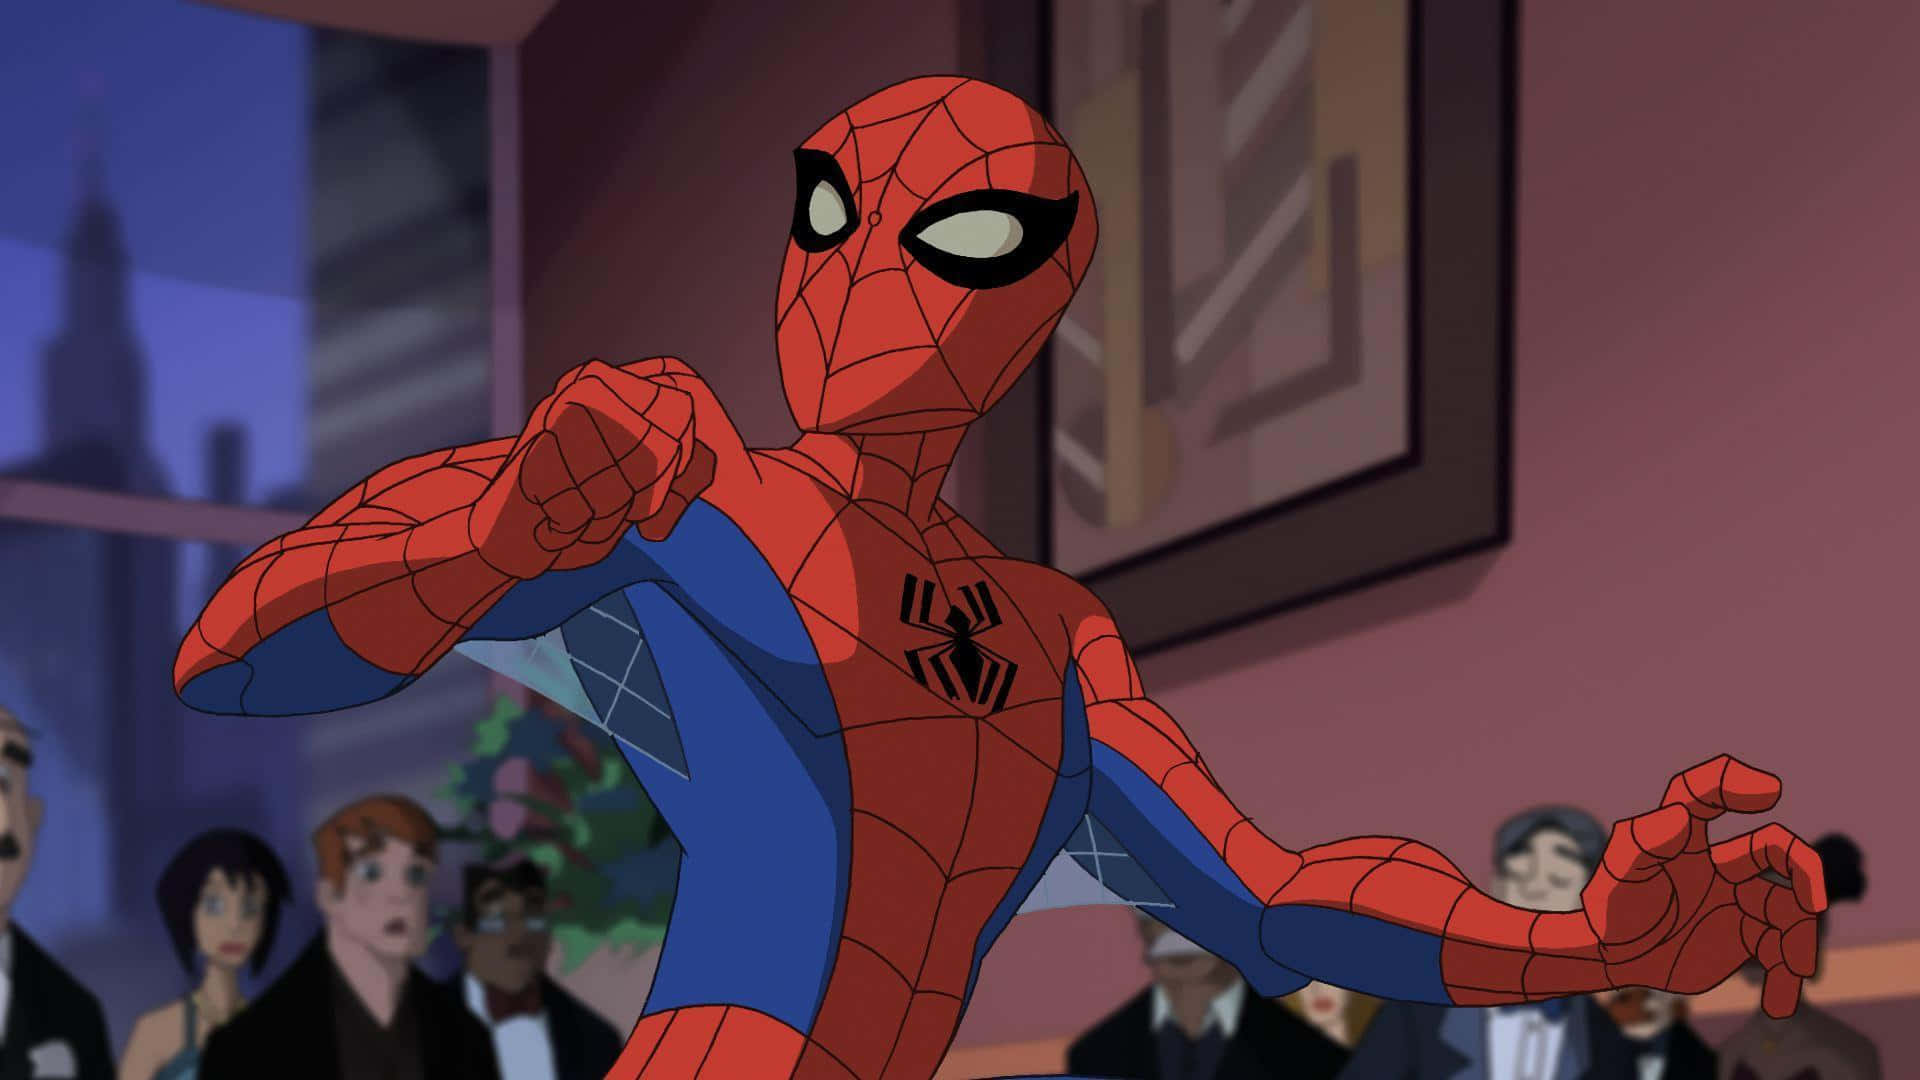 The Spectacular Spider-man Crowd Wallpaper